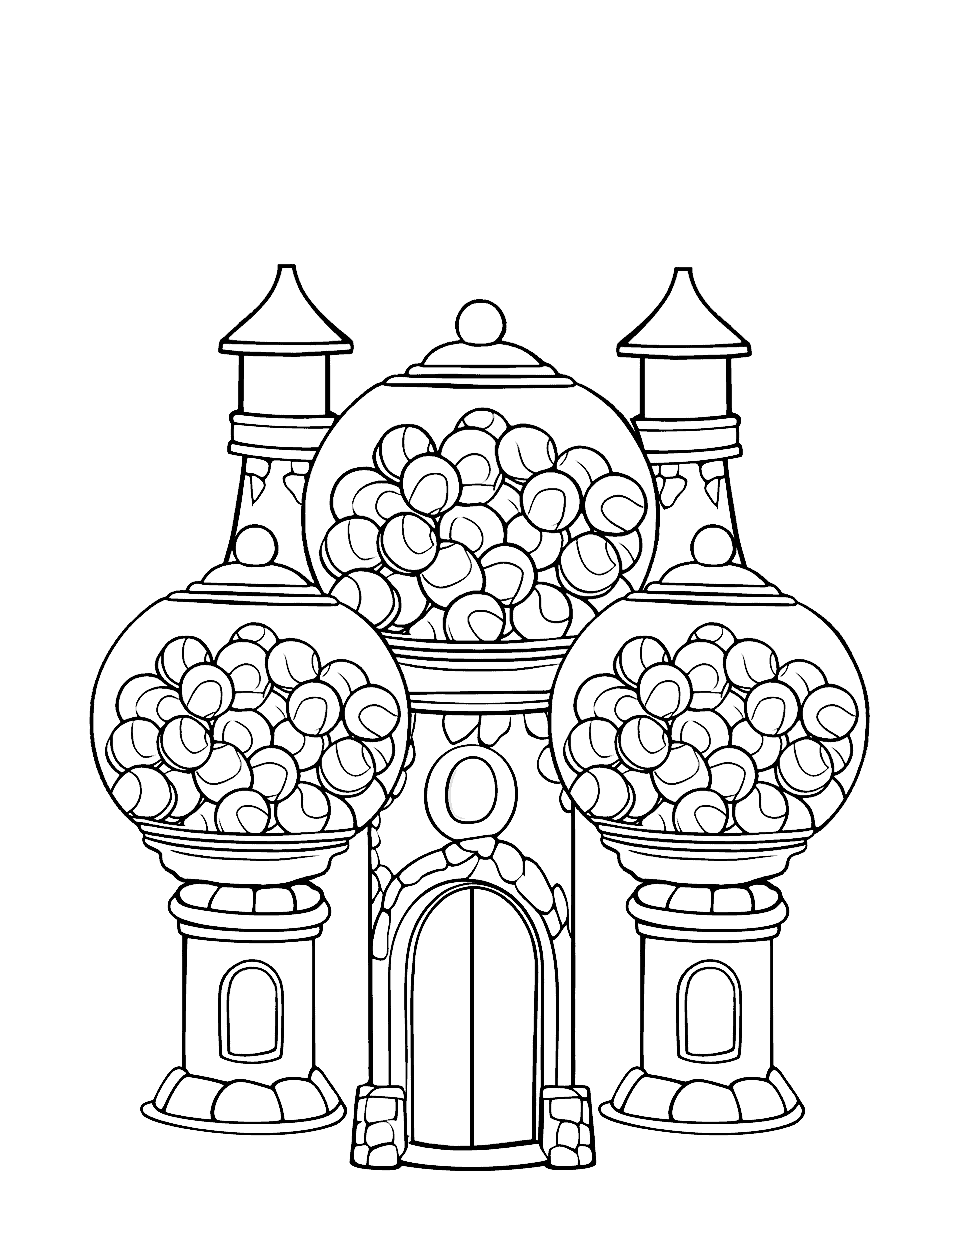 Gumball Machine Castle Candy Coloring Page - A castle built entirely out of gumball machines.